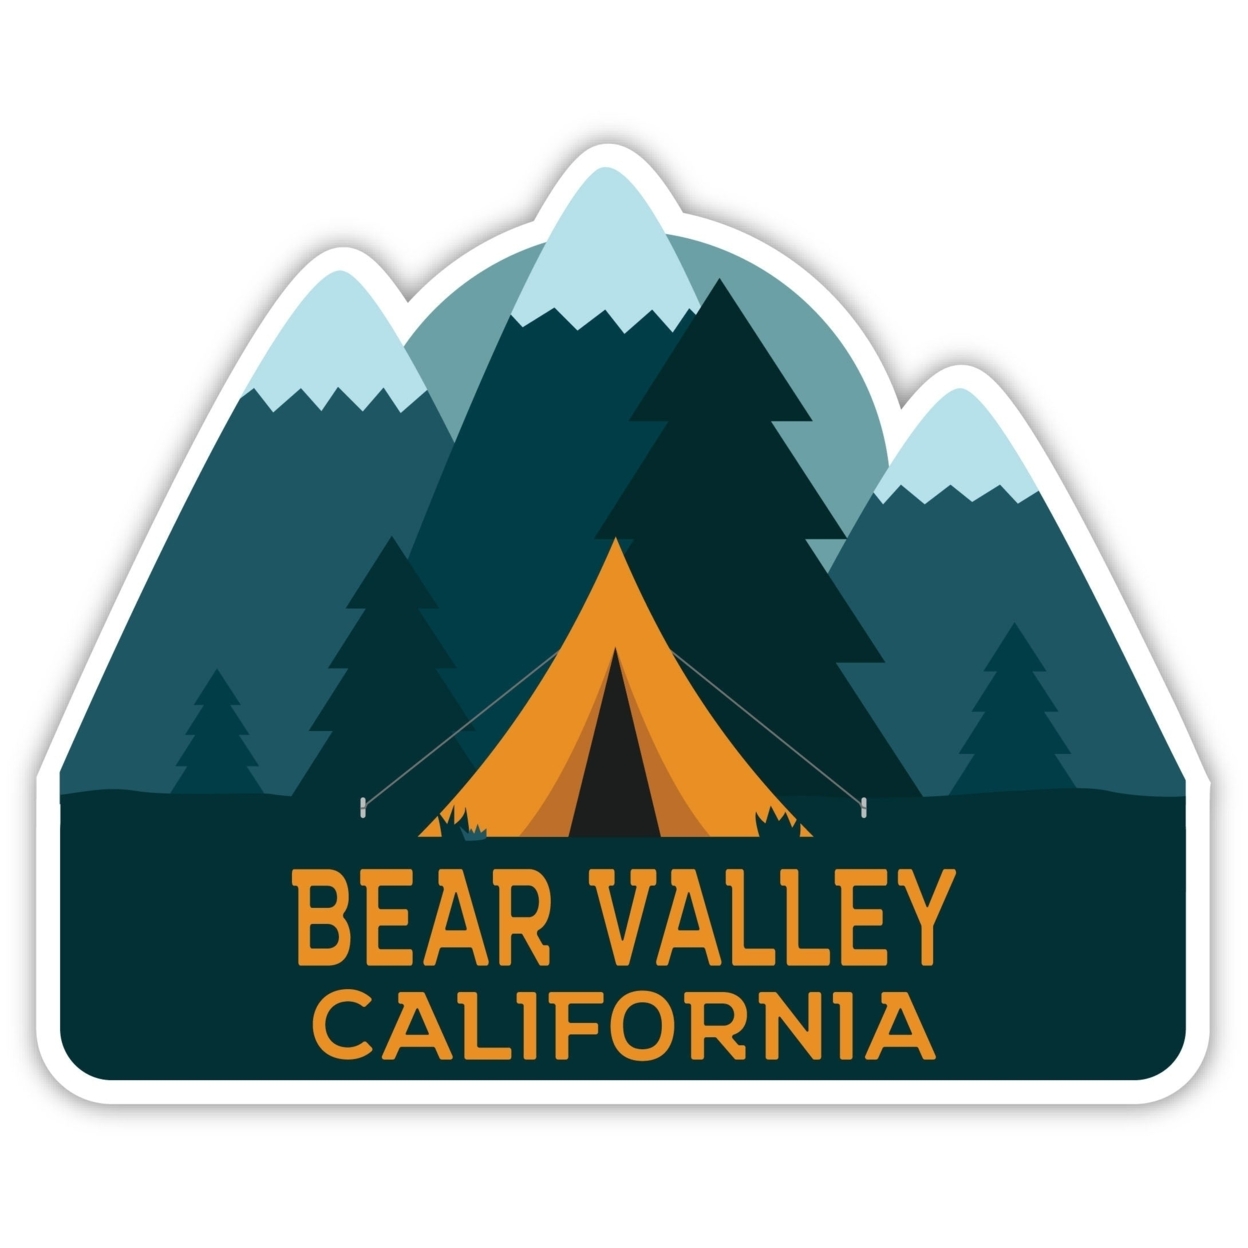 Bear Valley California Souvenir Decorative Stickers (Choose Theme And Size) - Single Unit, 8-Inch, Tent